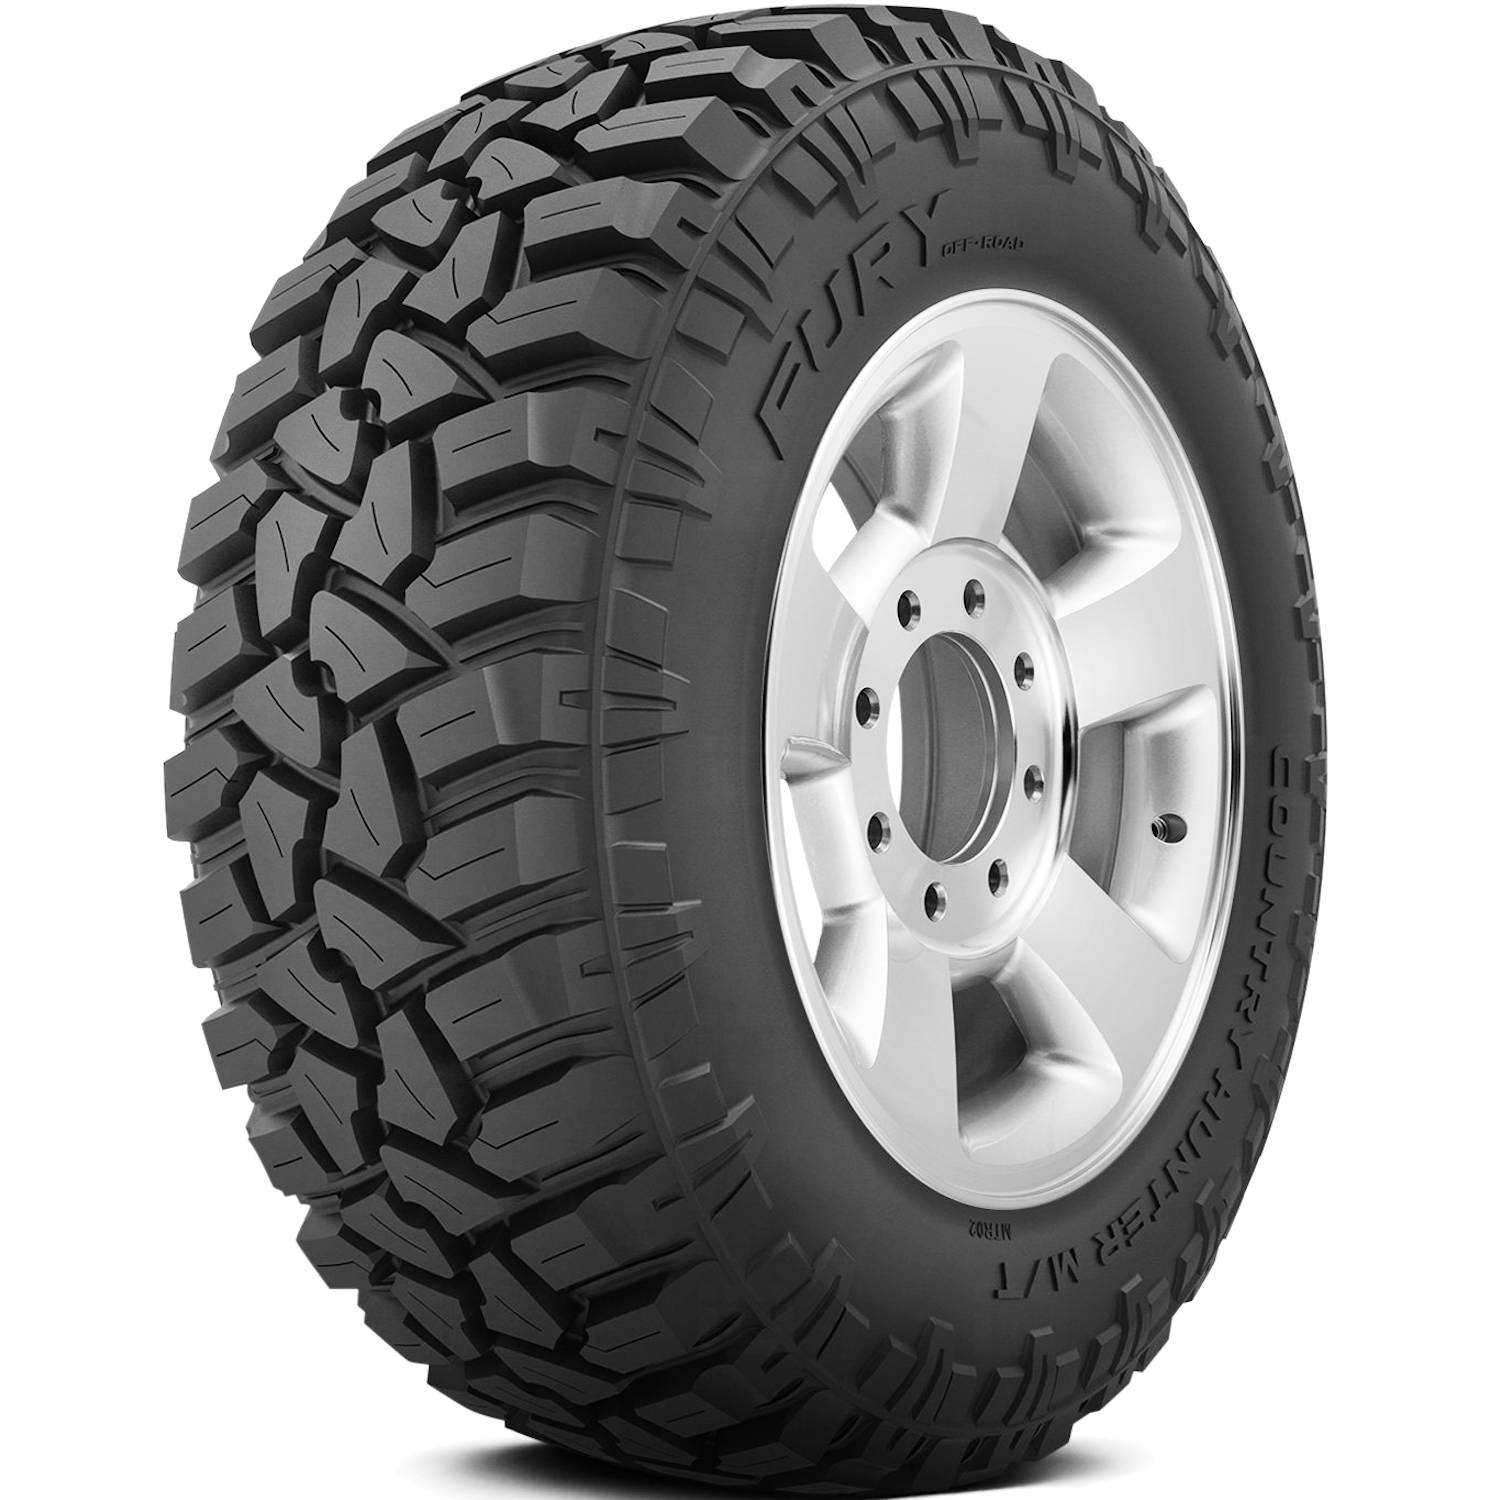 FURY OFFROAD COUNTRY HUNTER MTII 40X15.50R24LT Tires